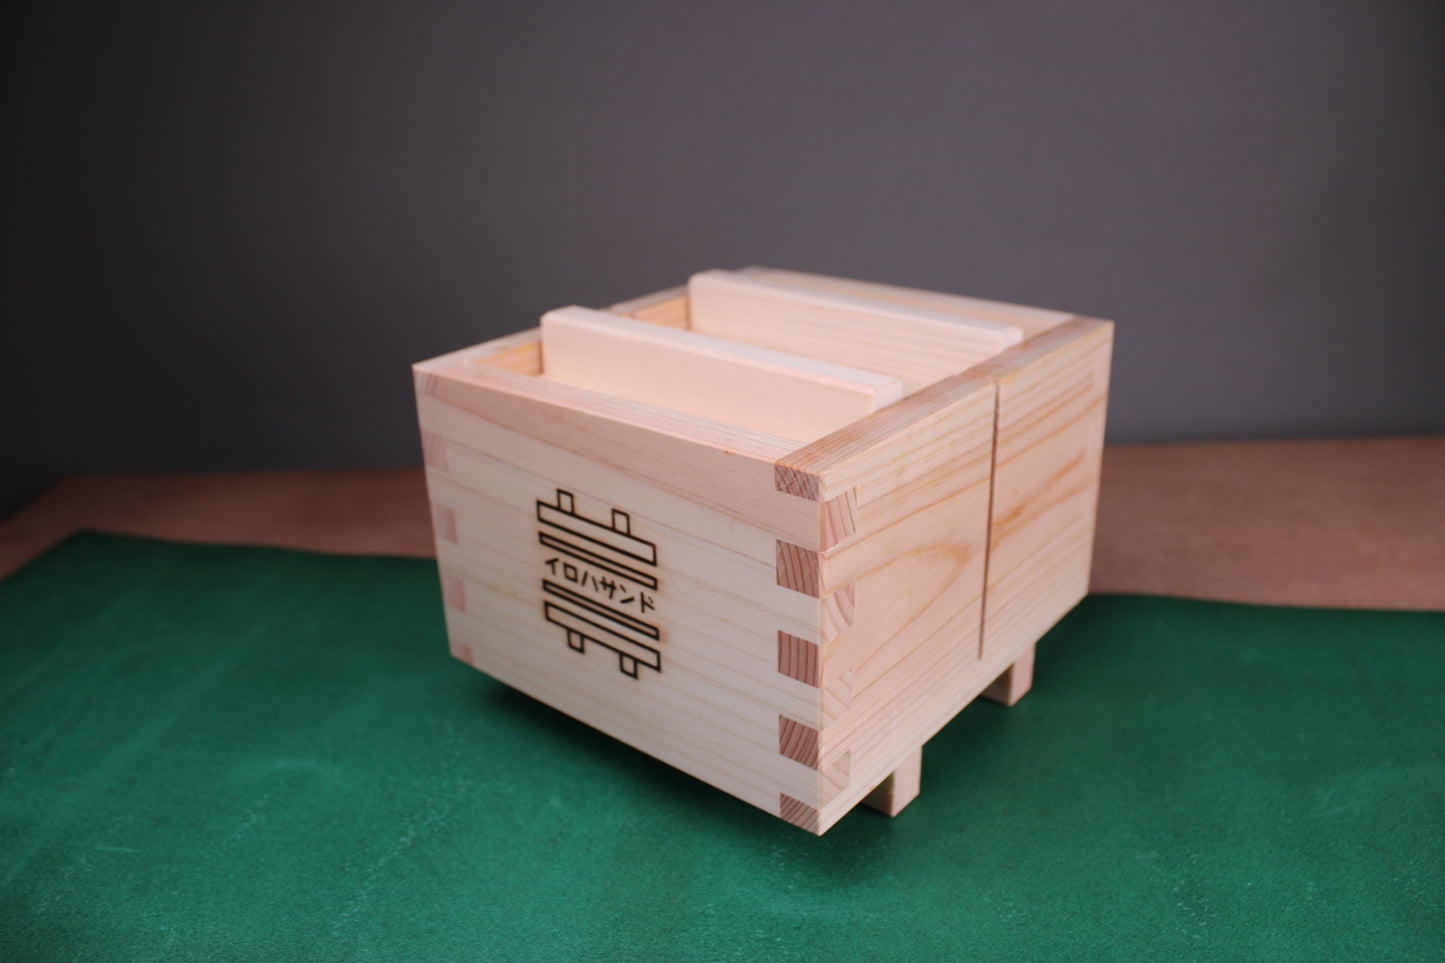 iroha sandwich maker by yamacoh made from hinoki wood atop green surface with grey background